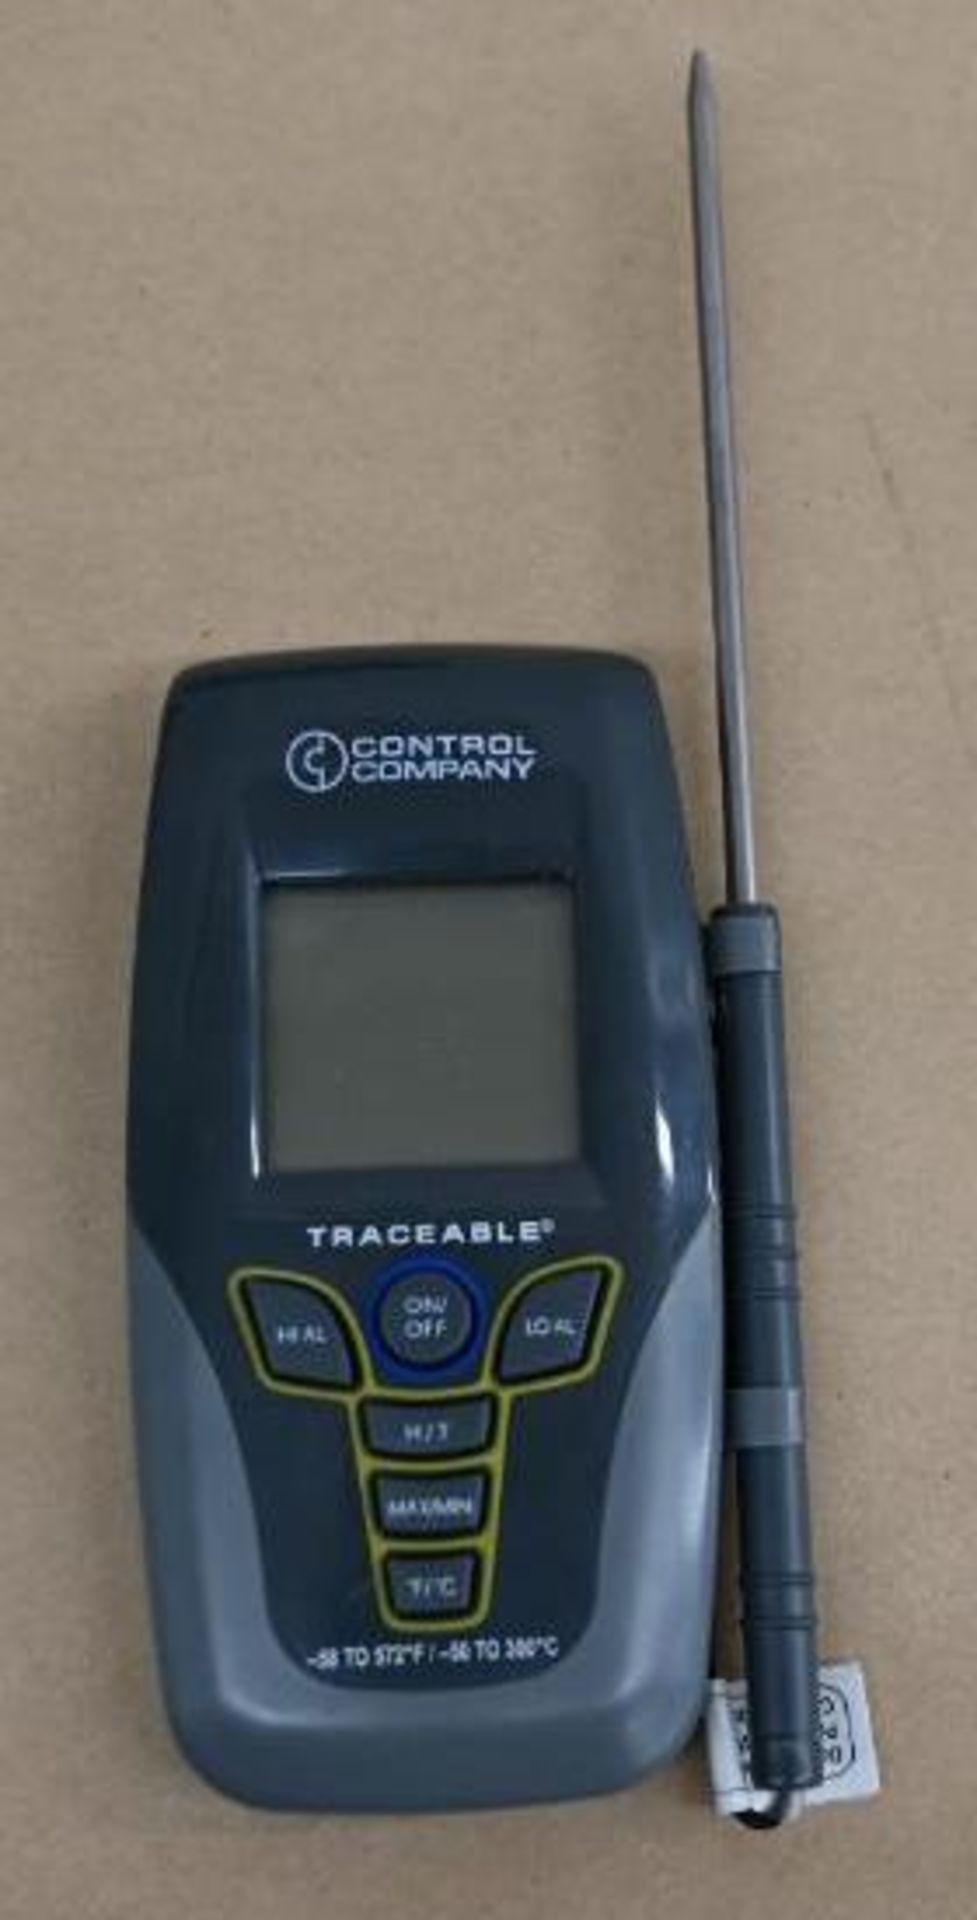 Control Company Traceable Thermometer - Image 5 of 6